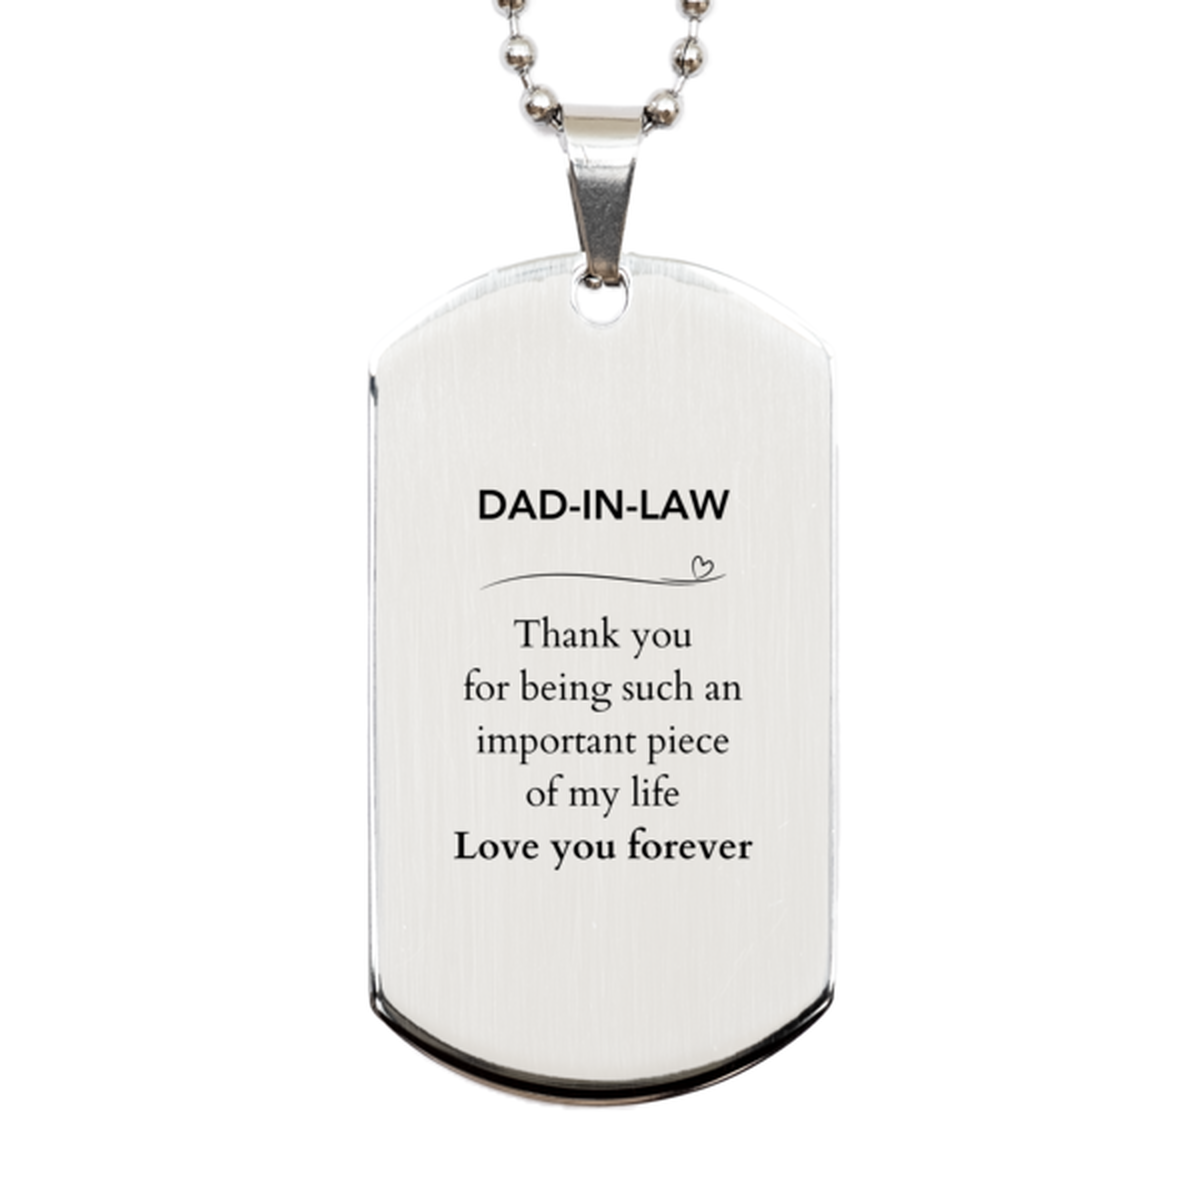 Appropriate Dad-in-law Silver Dog Tag Epic Birthday Gifts for Dad-in-law Thank you for being such an important piece of my life Dad-in-law Christmas Mothers Fathers Day